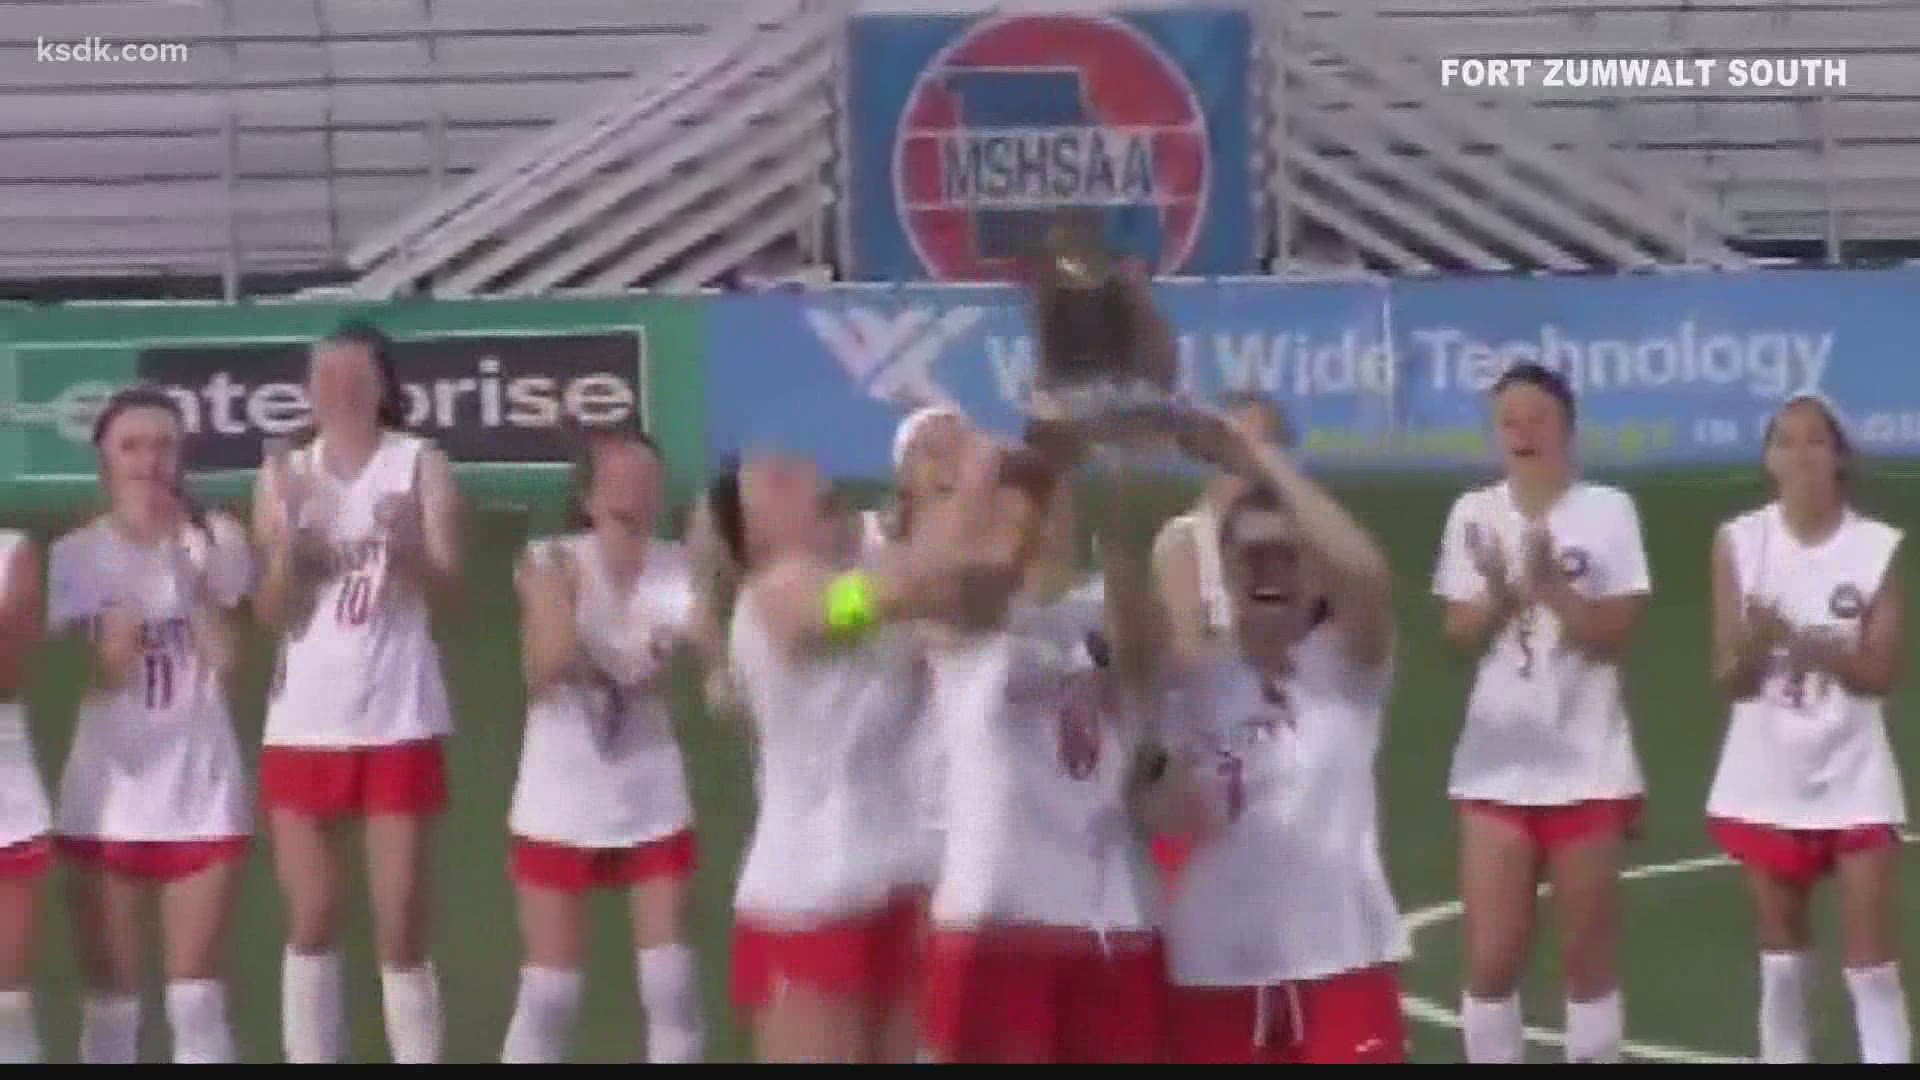 FZS girls soccer team earned the state title with a 5-2 win over Grain Valley